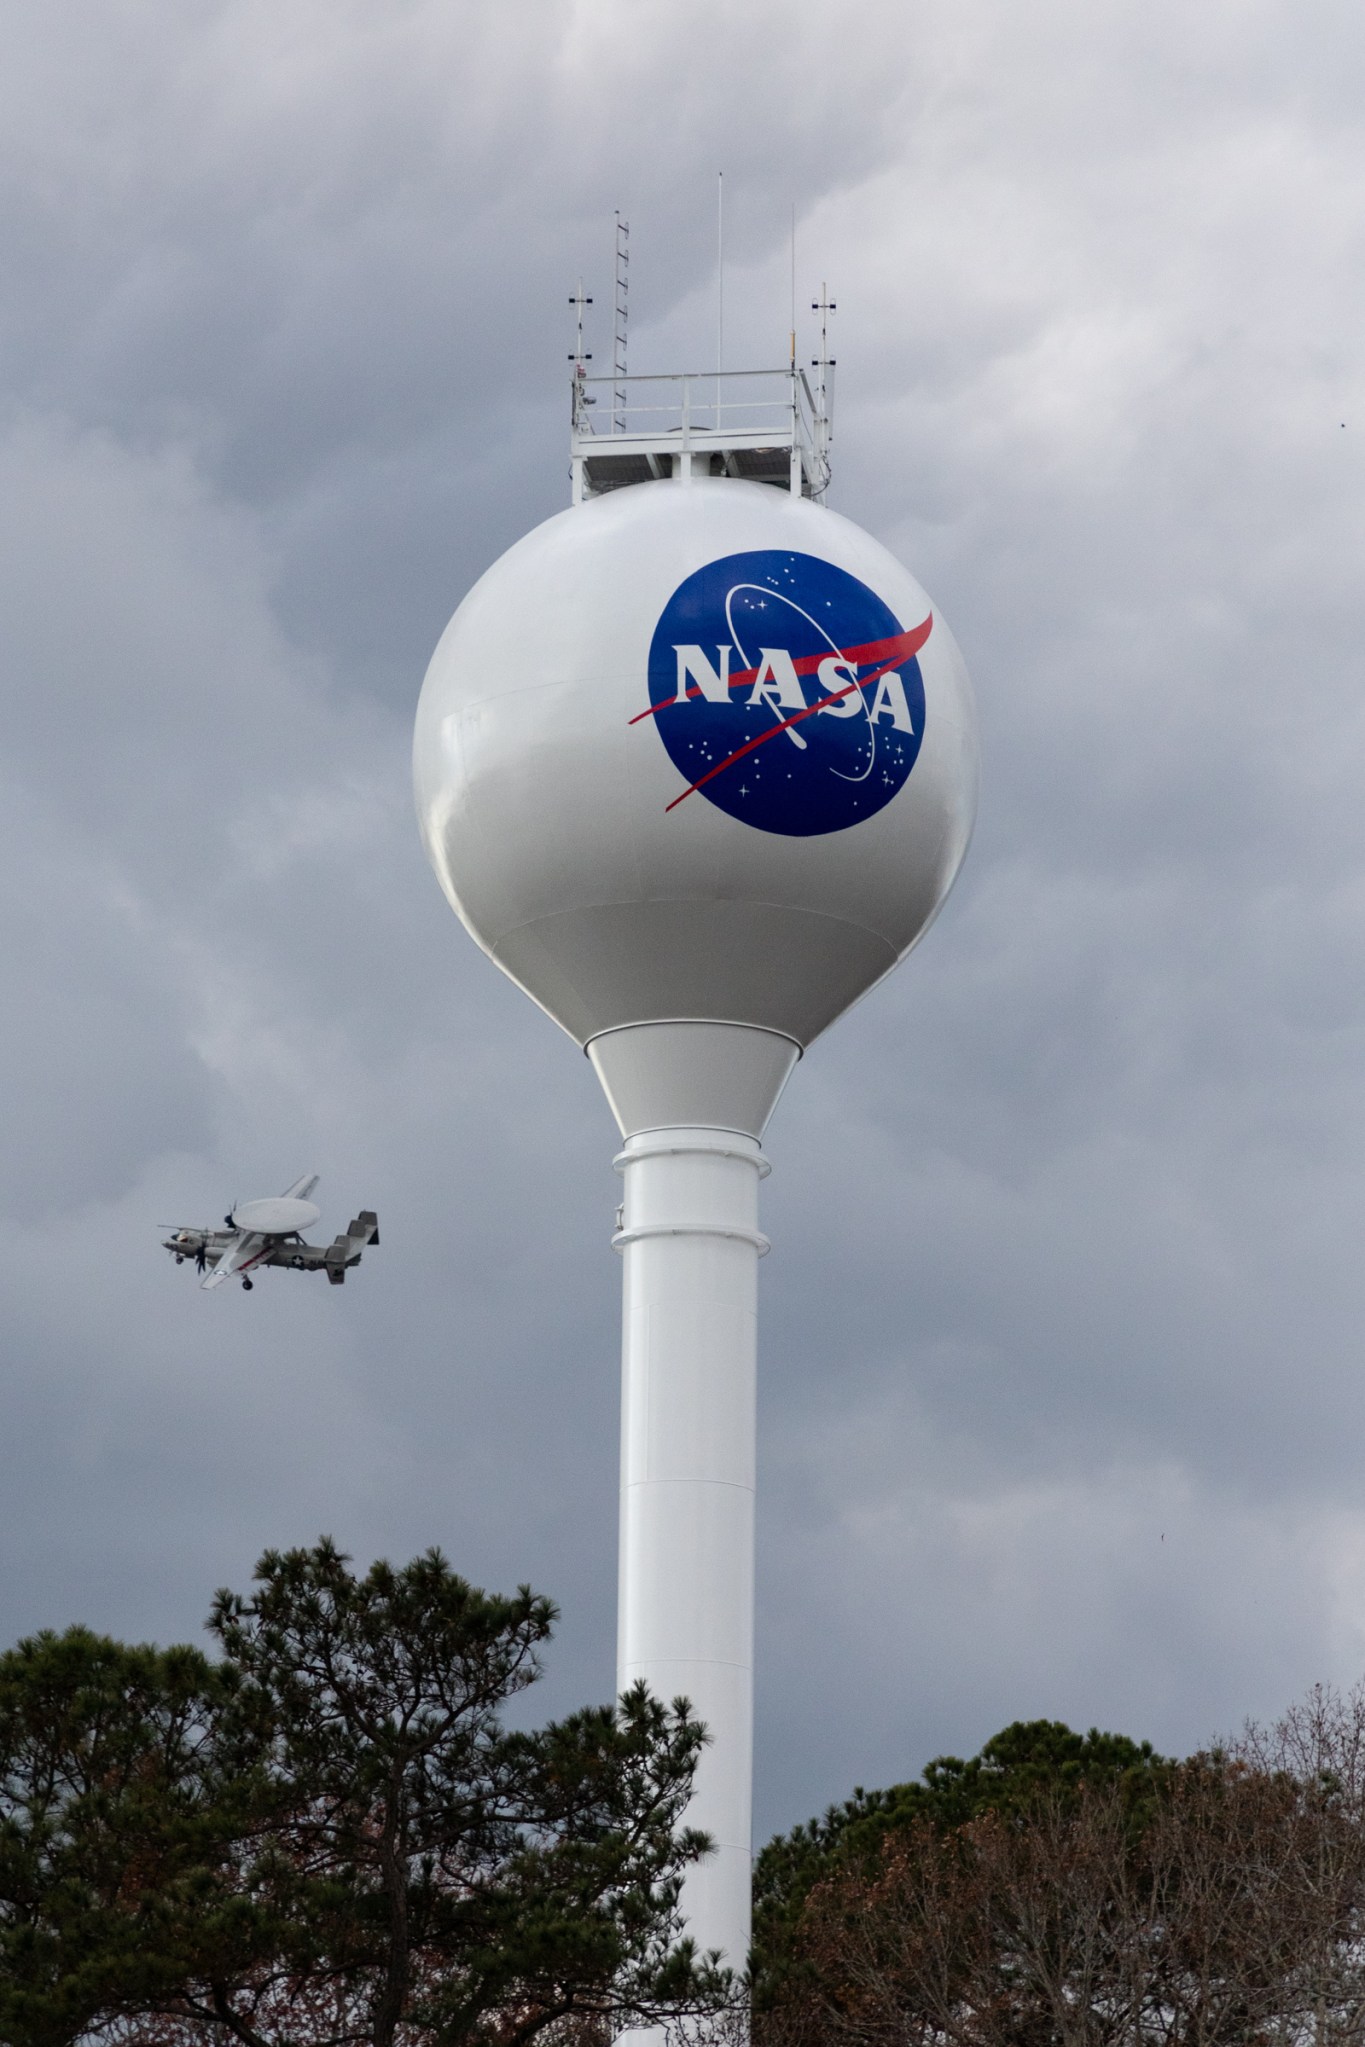 Elevated drinking water storage tank with painted NASA meatball logo